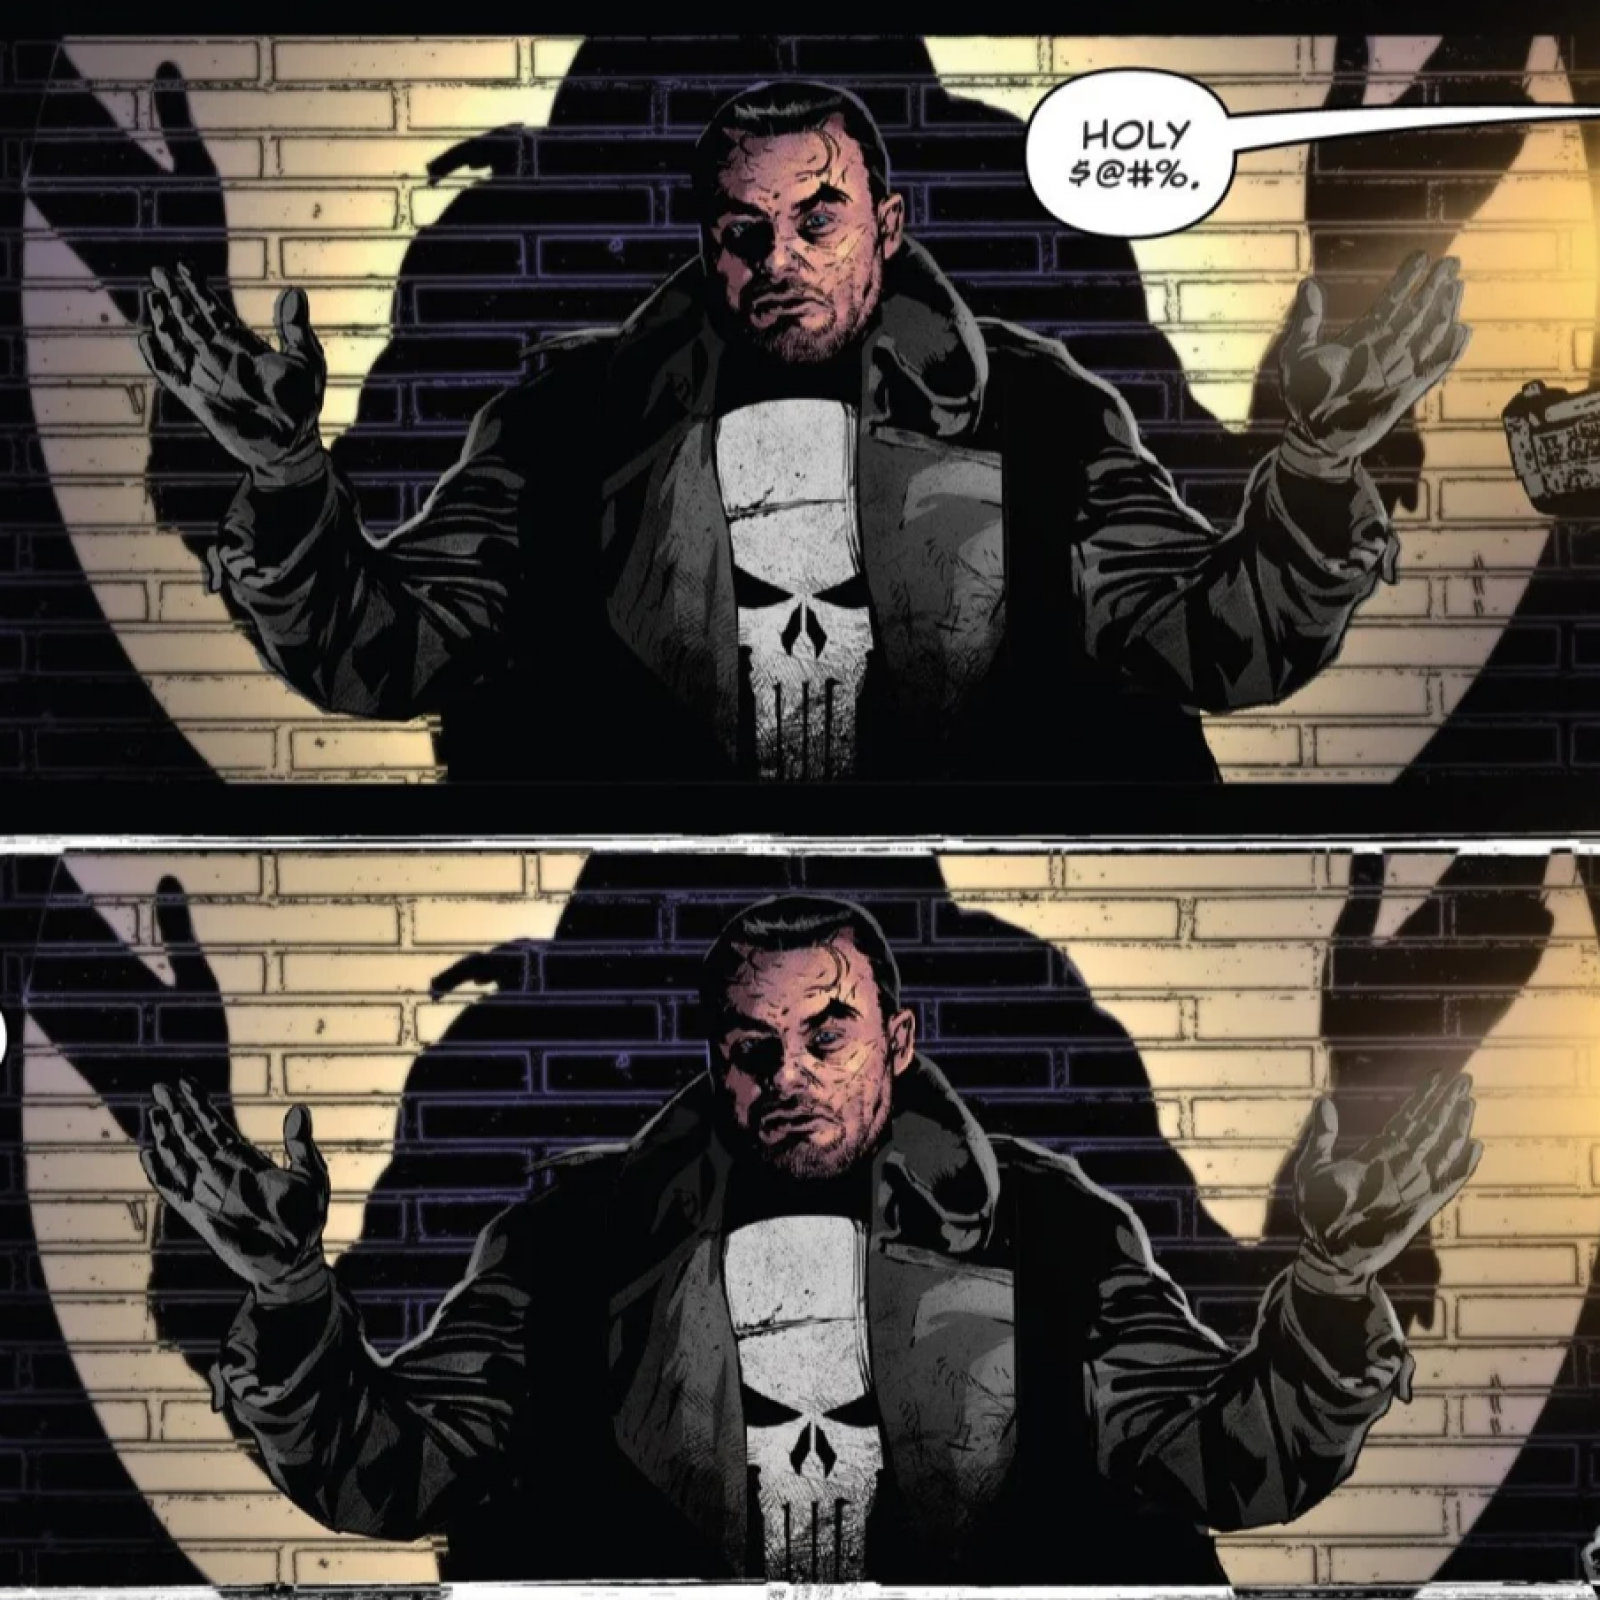 Marvel S The Punisher Lays The Beatdown On Cops Who Use His Skull Symbol For Blue Lives Matter Movement